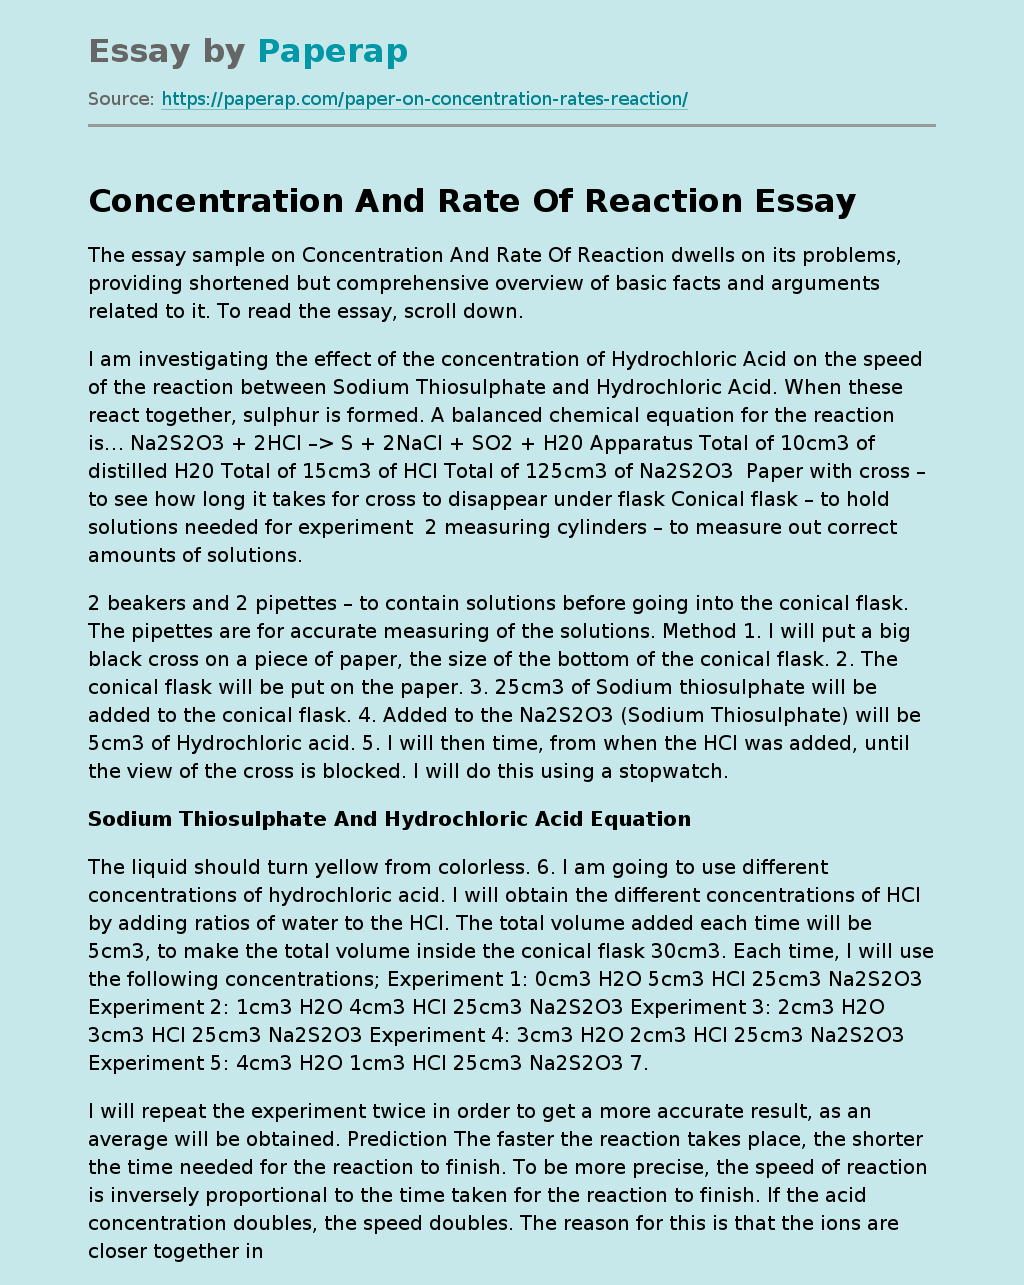 Concentration And Rate Of Reaction